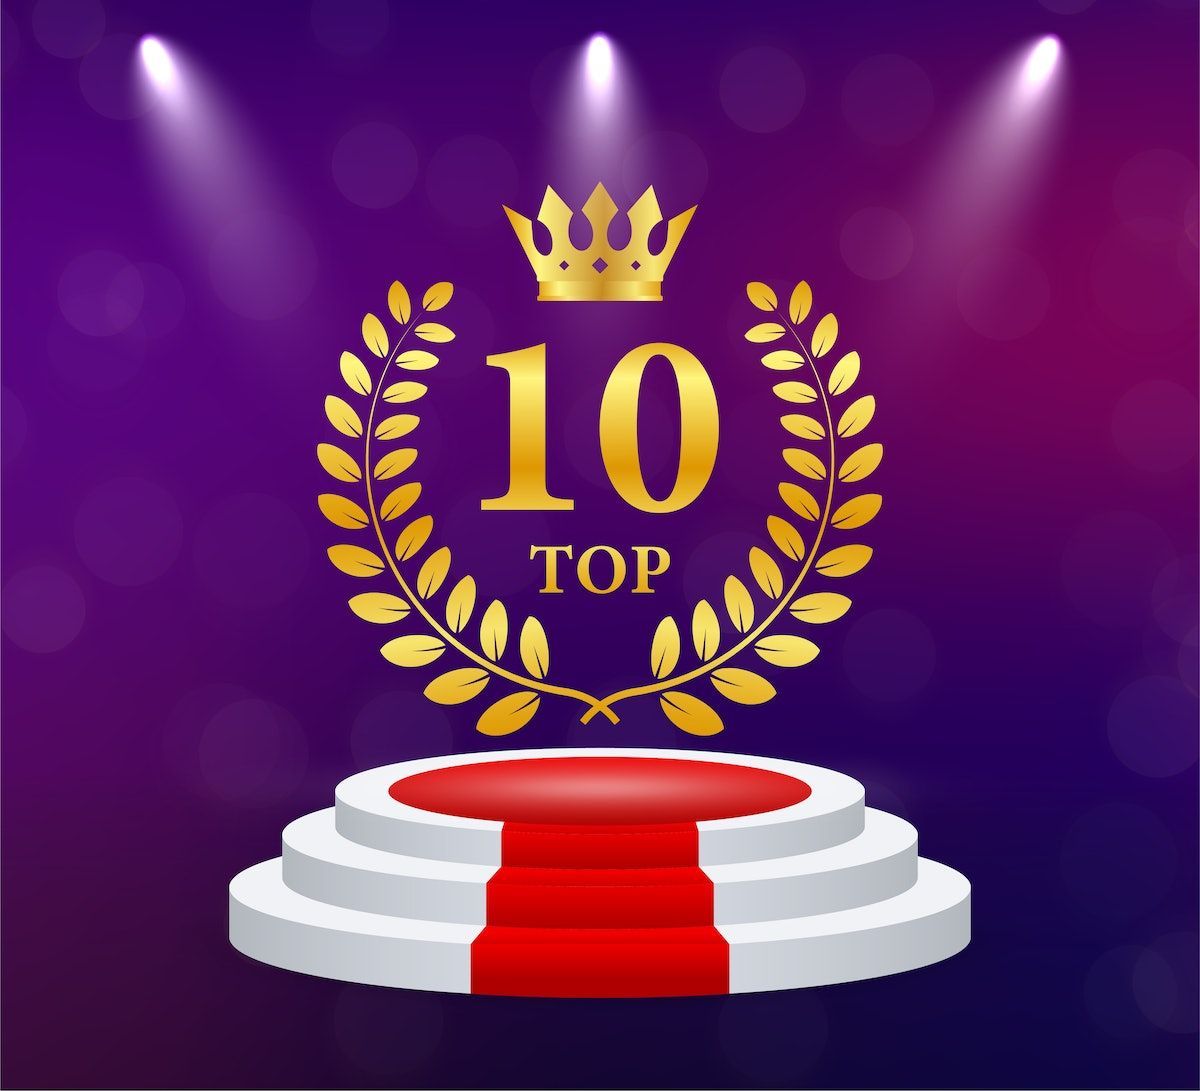 Medicolegal investigations and workforce issues feature prominently among Aunt Minnie Europe's most popular articles in 2023. Check out our top 10 list now. buff.ly/3RqmcTM #radiology